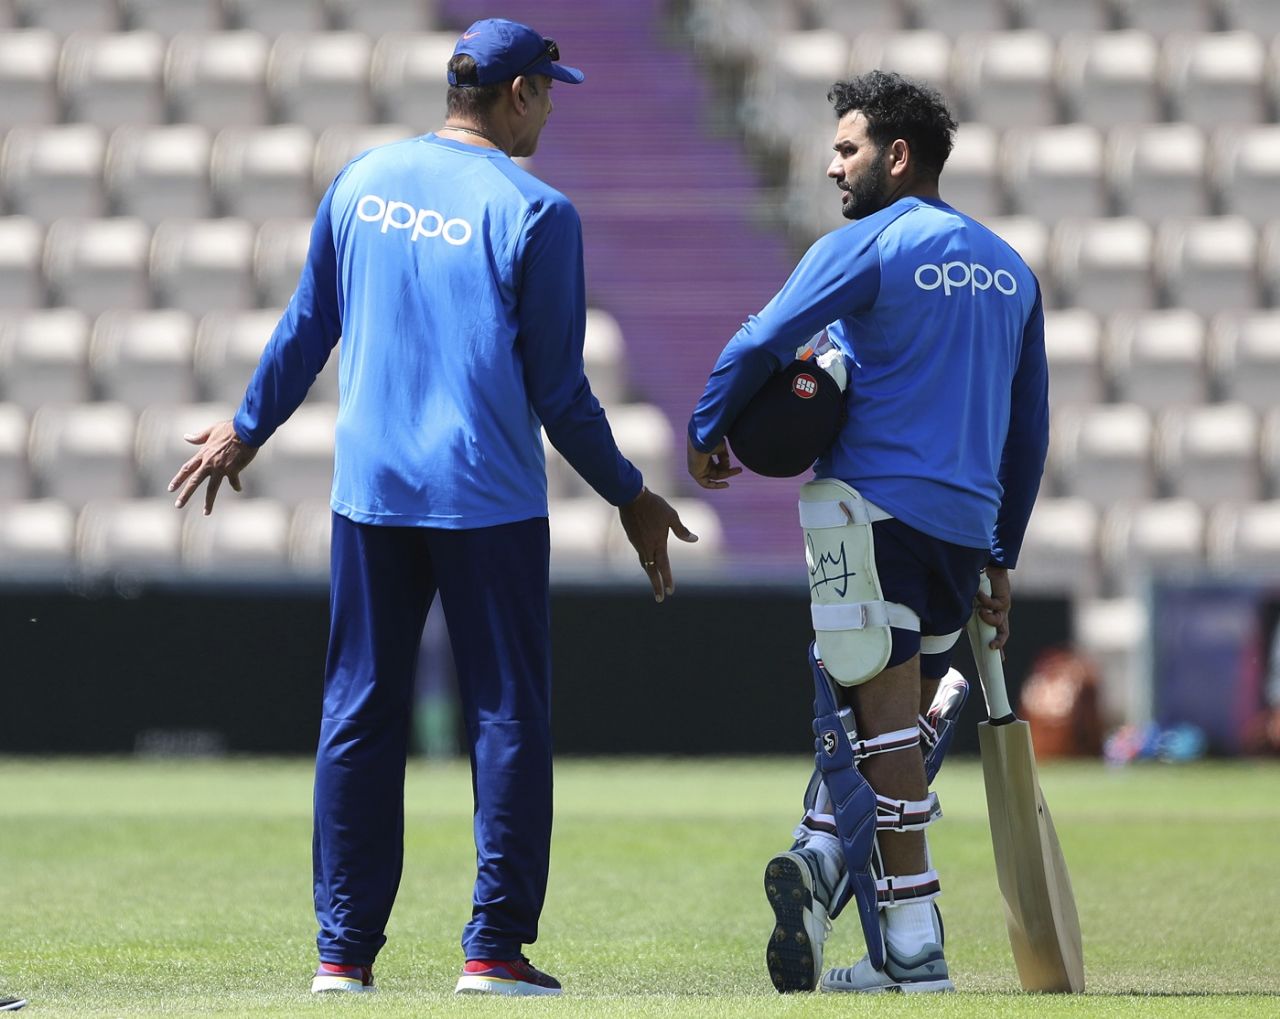 Ravi Shastri talks to Rohit Sharma during a training session, World Cup 2019, Southampton, June 1, 2019